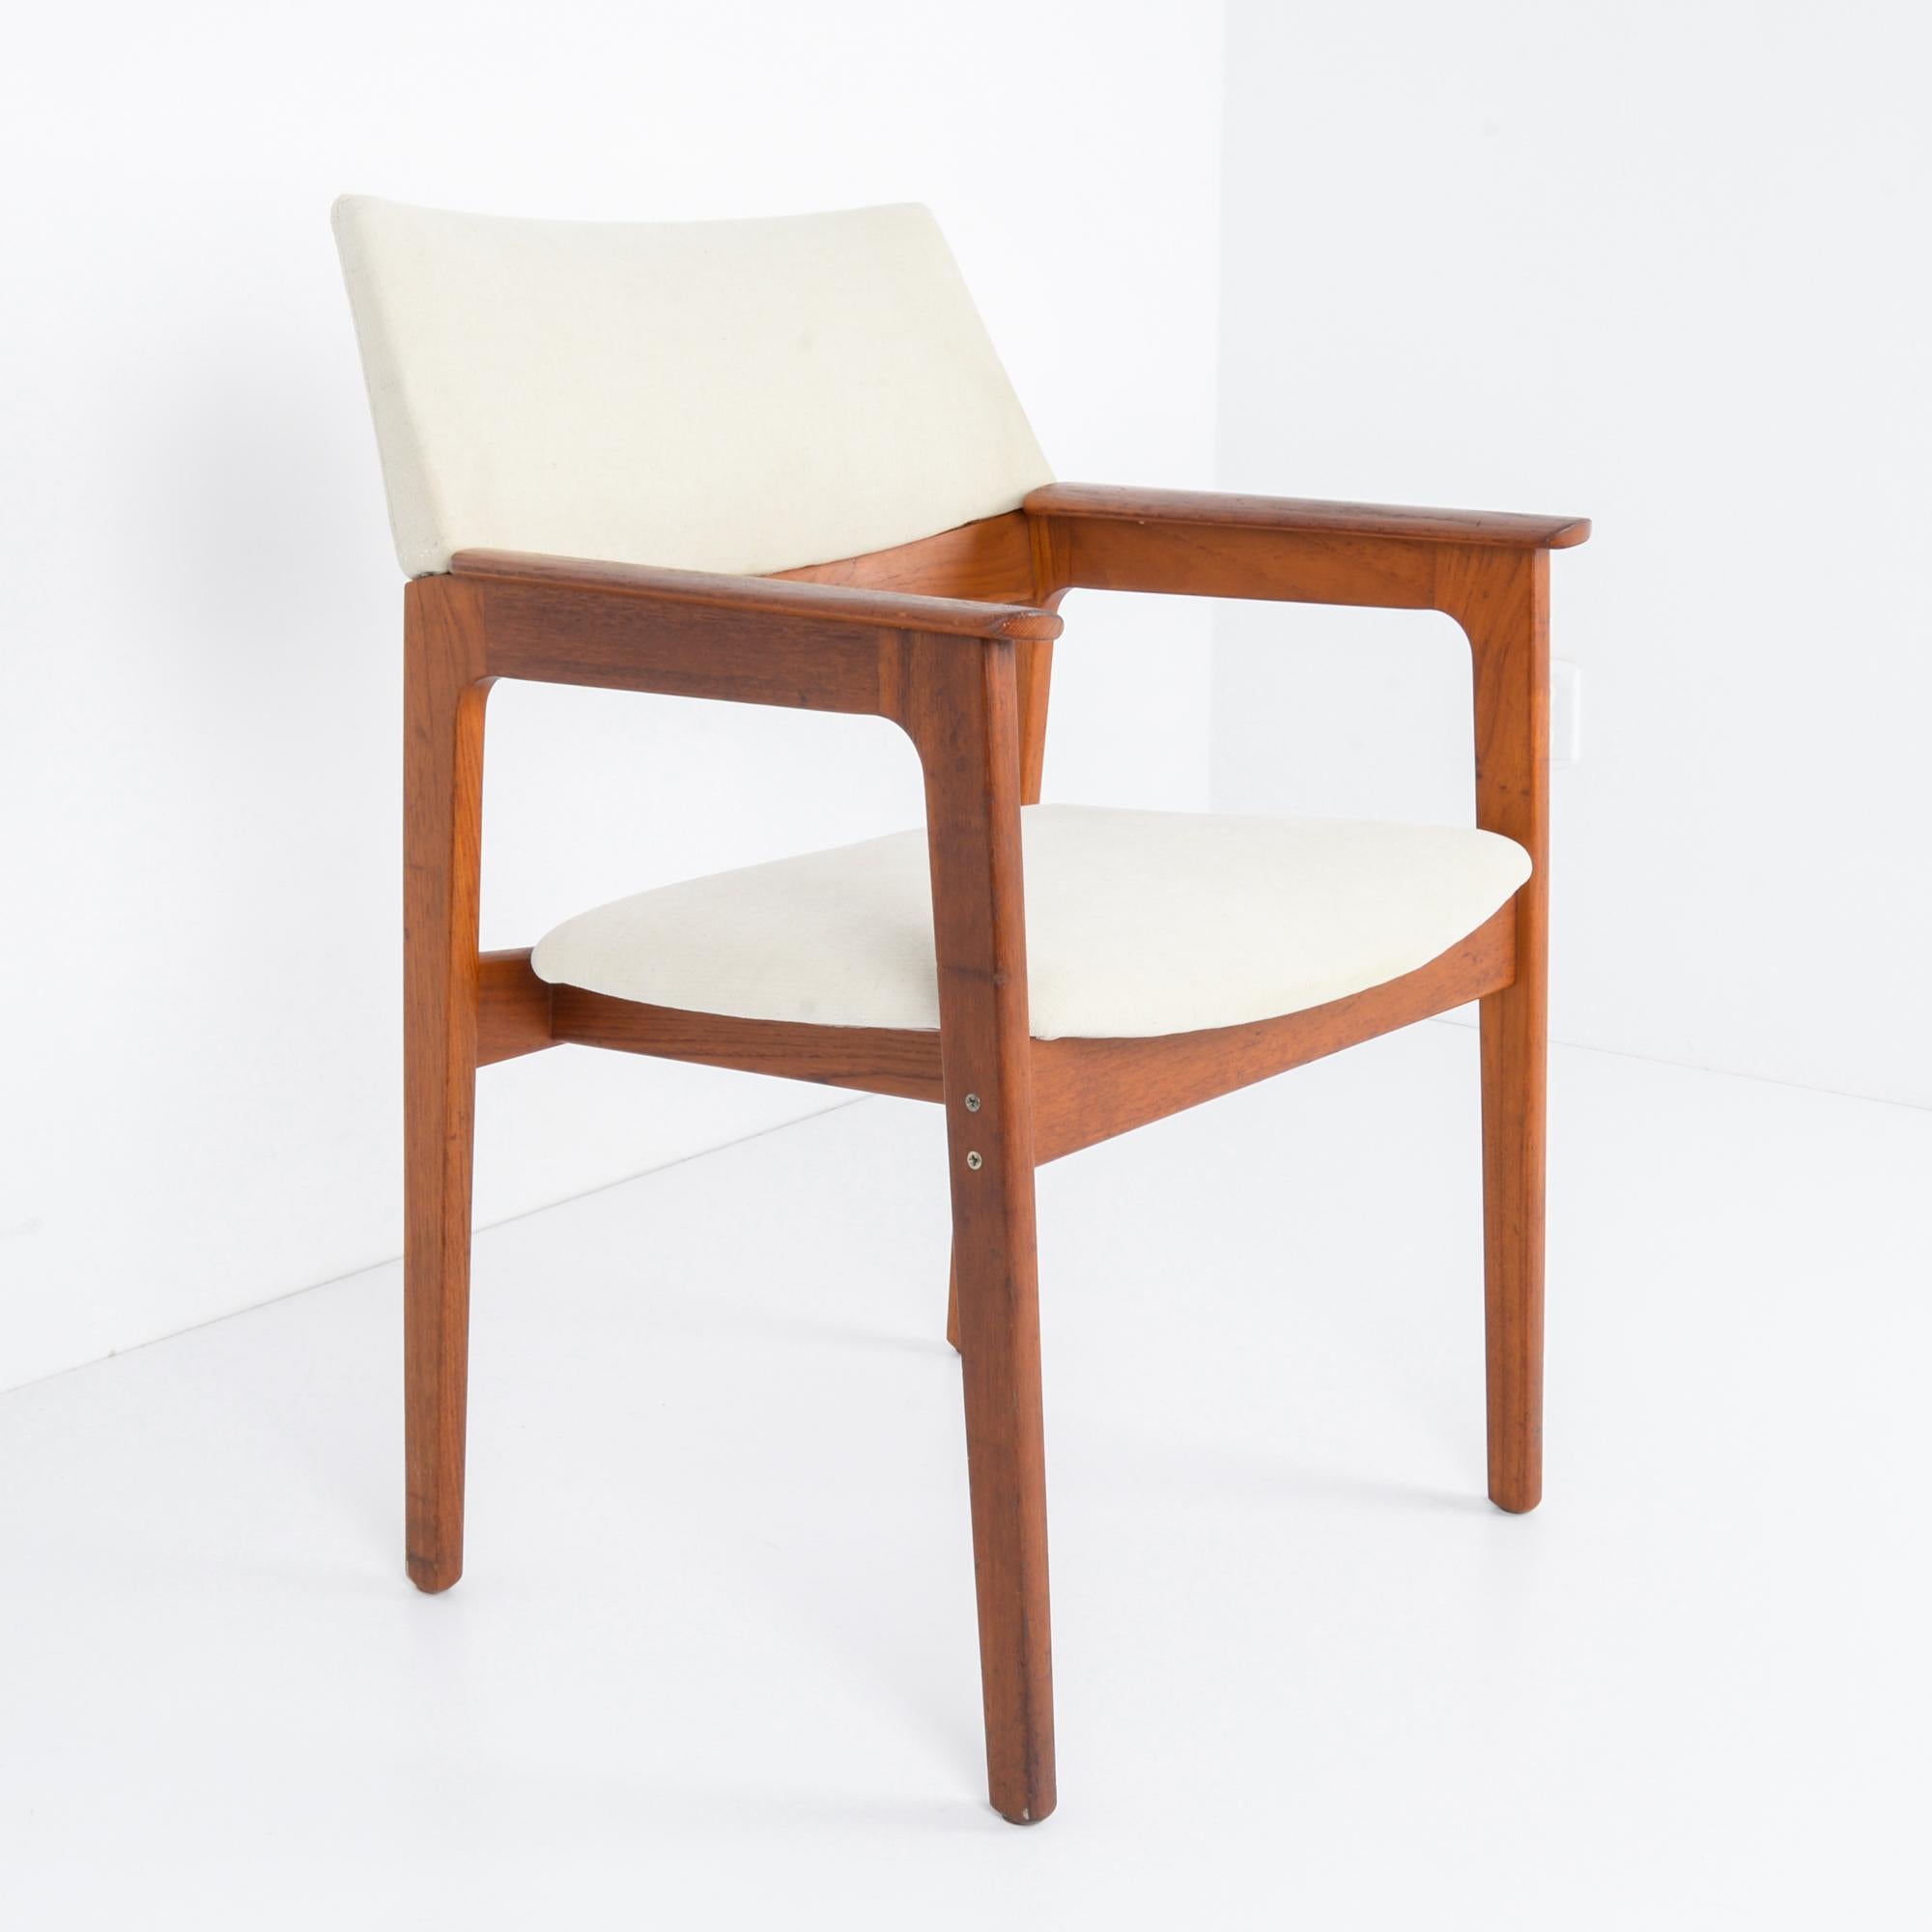 1960s Danish Wooden Armchair with Upholstered Seat and Back For Sale 4